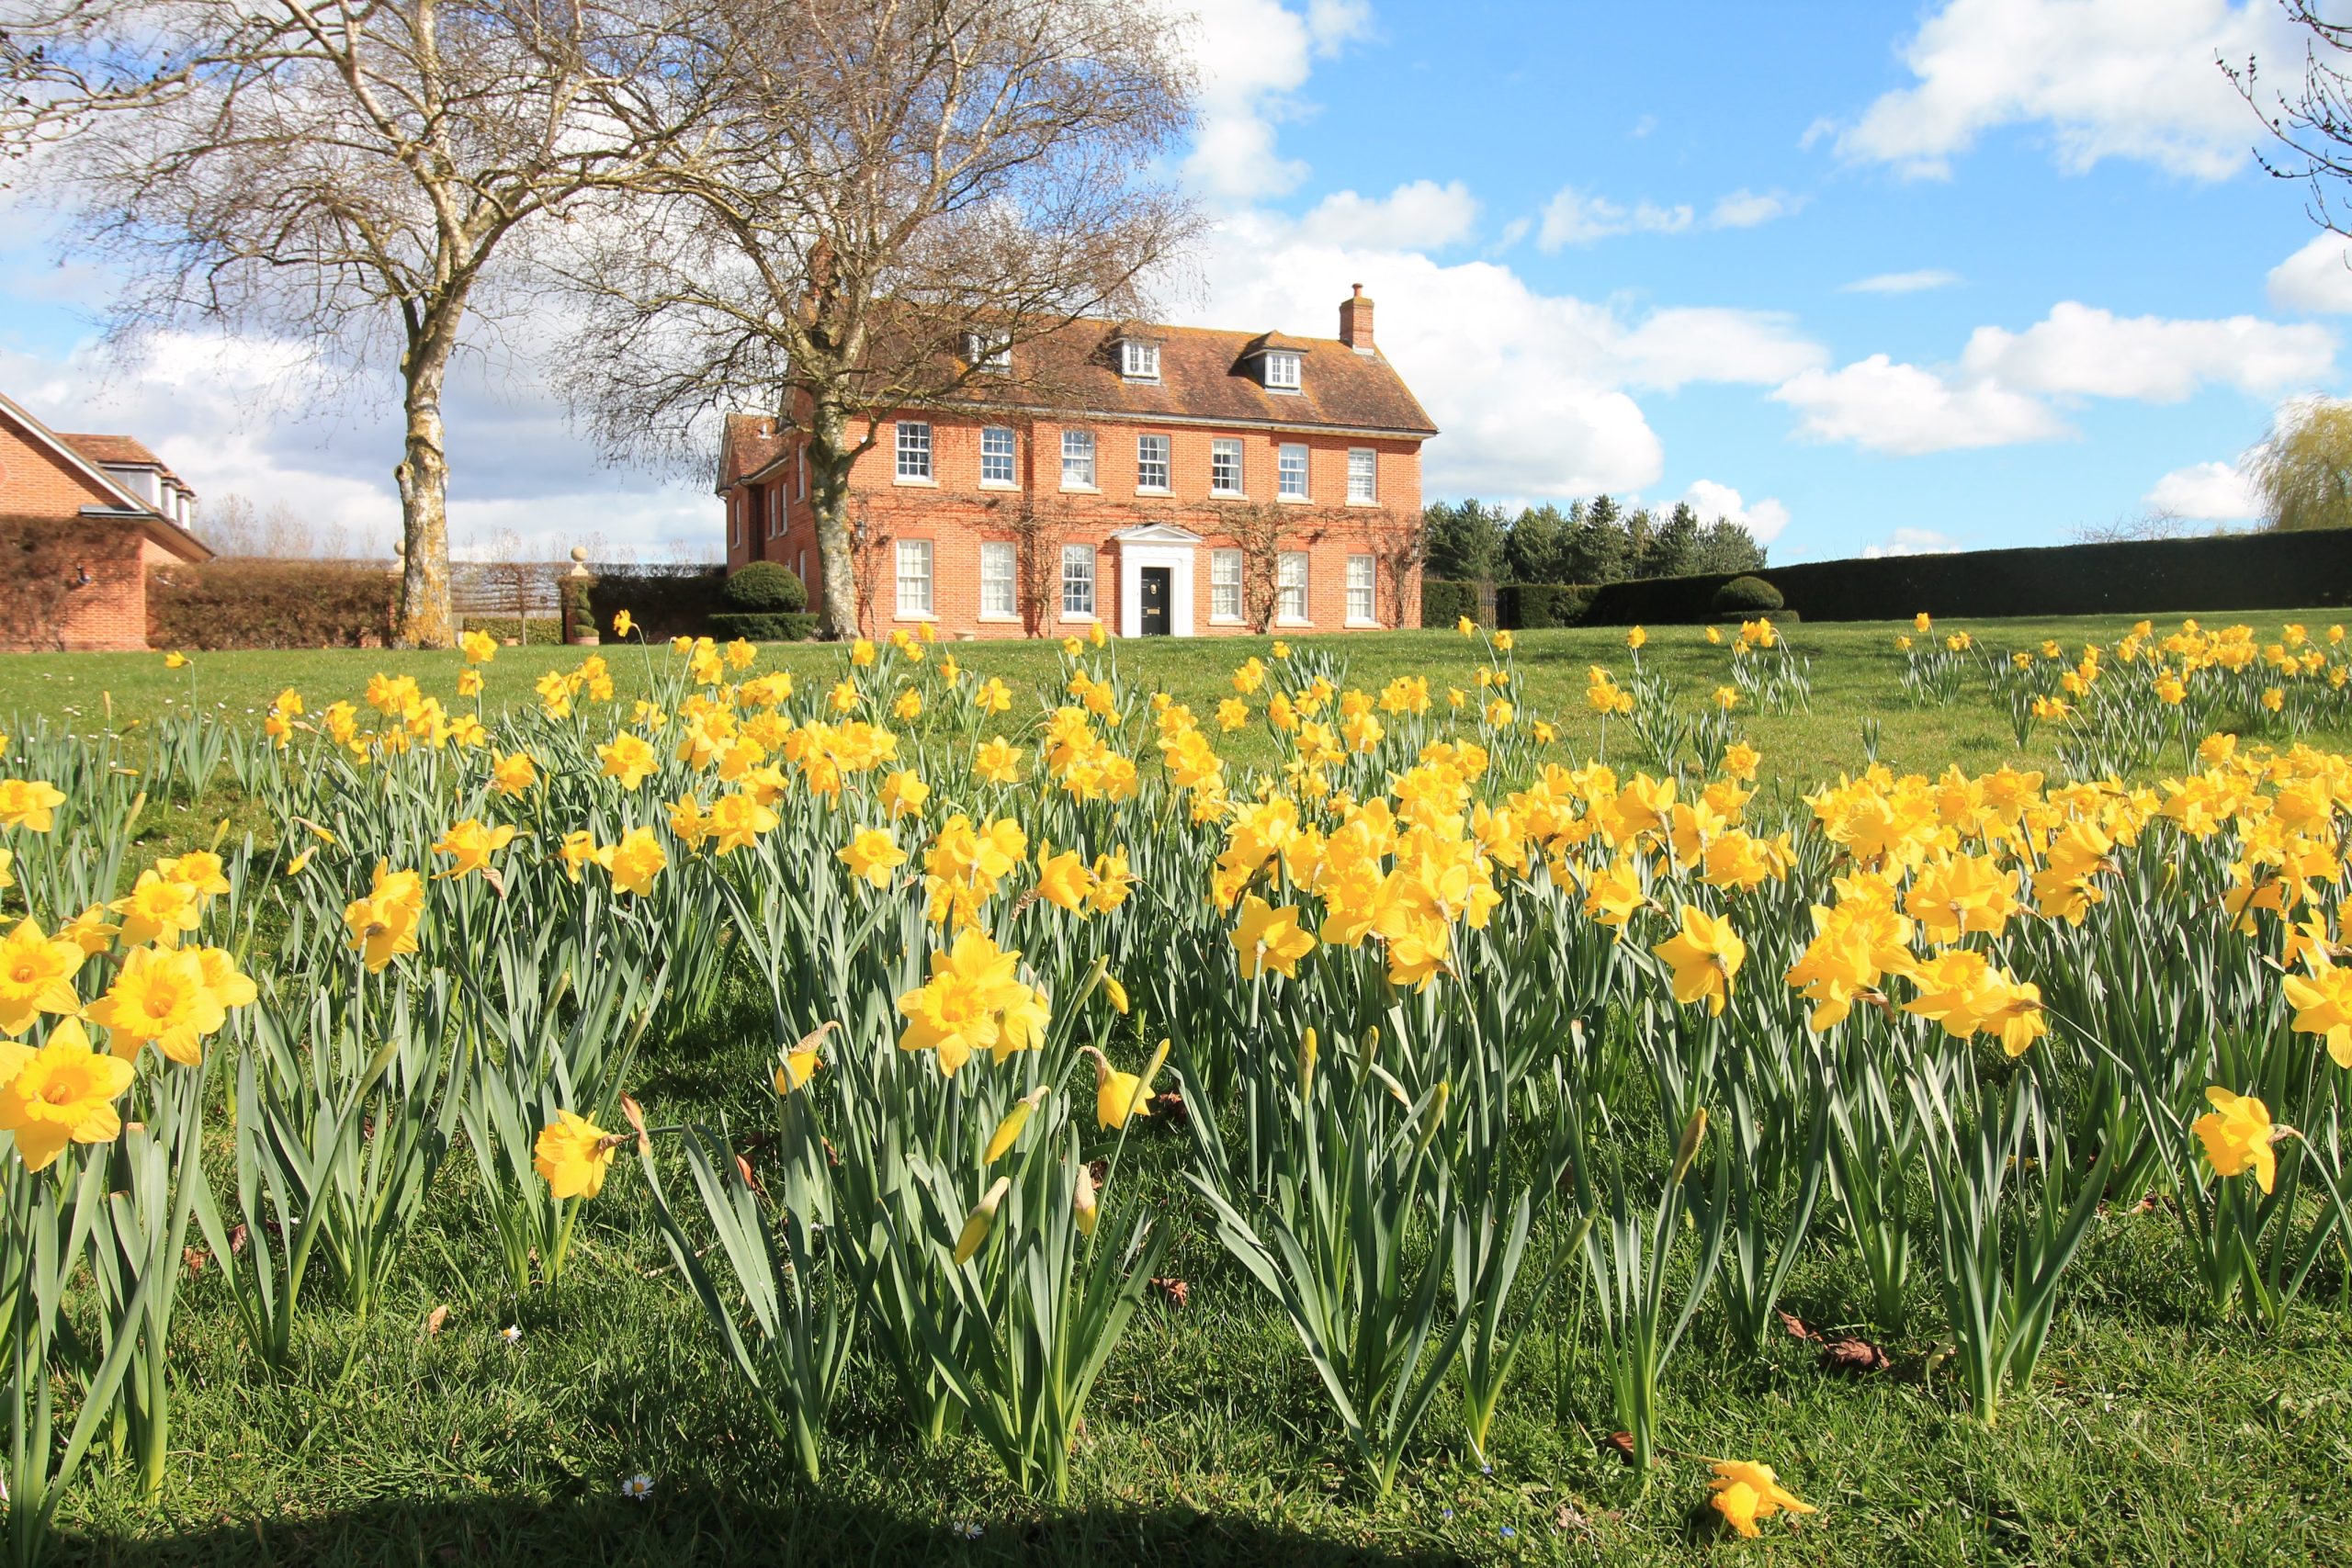 Country House surround by a field of daffodils